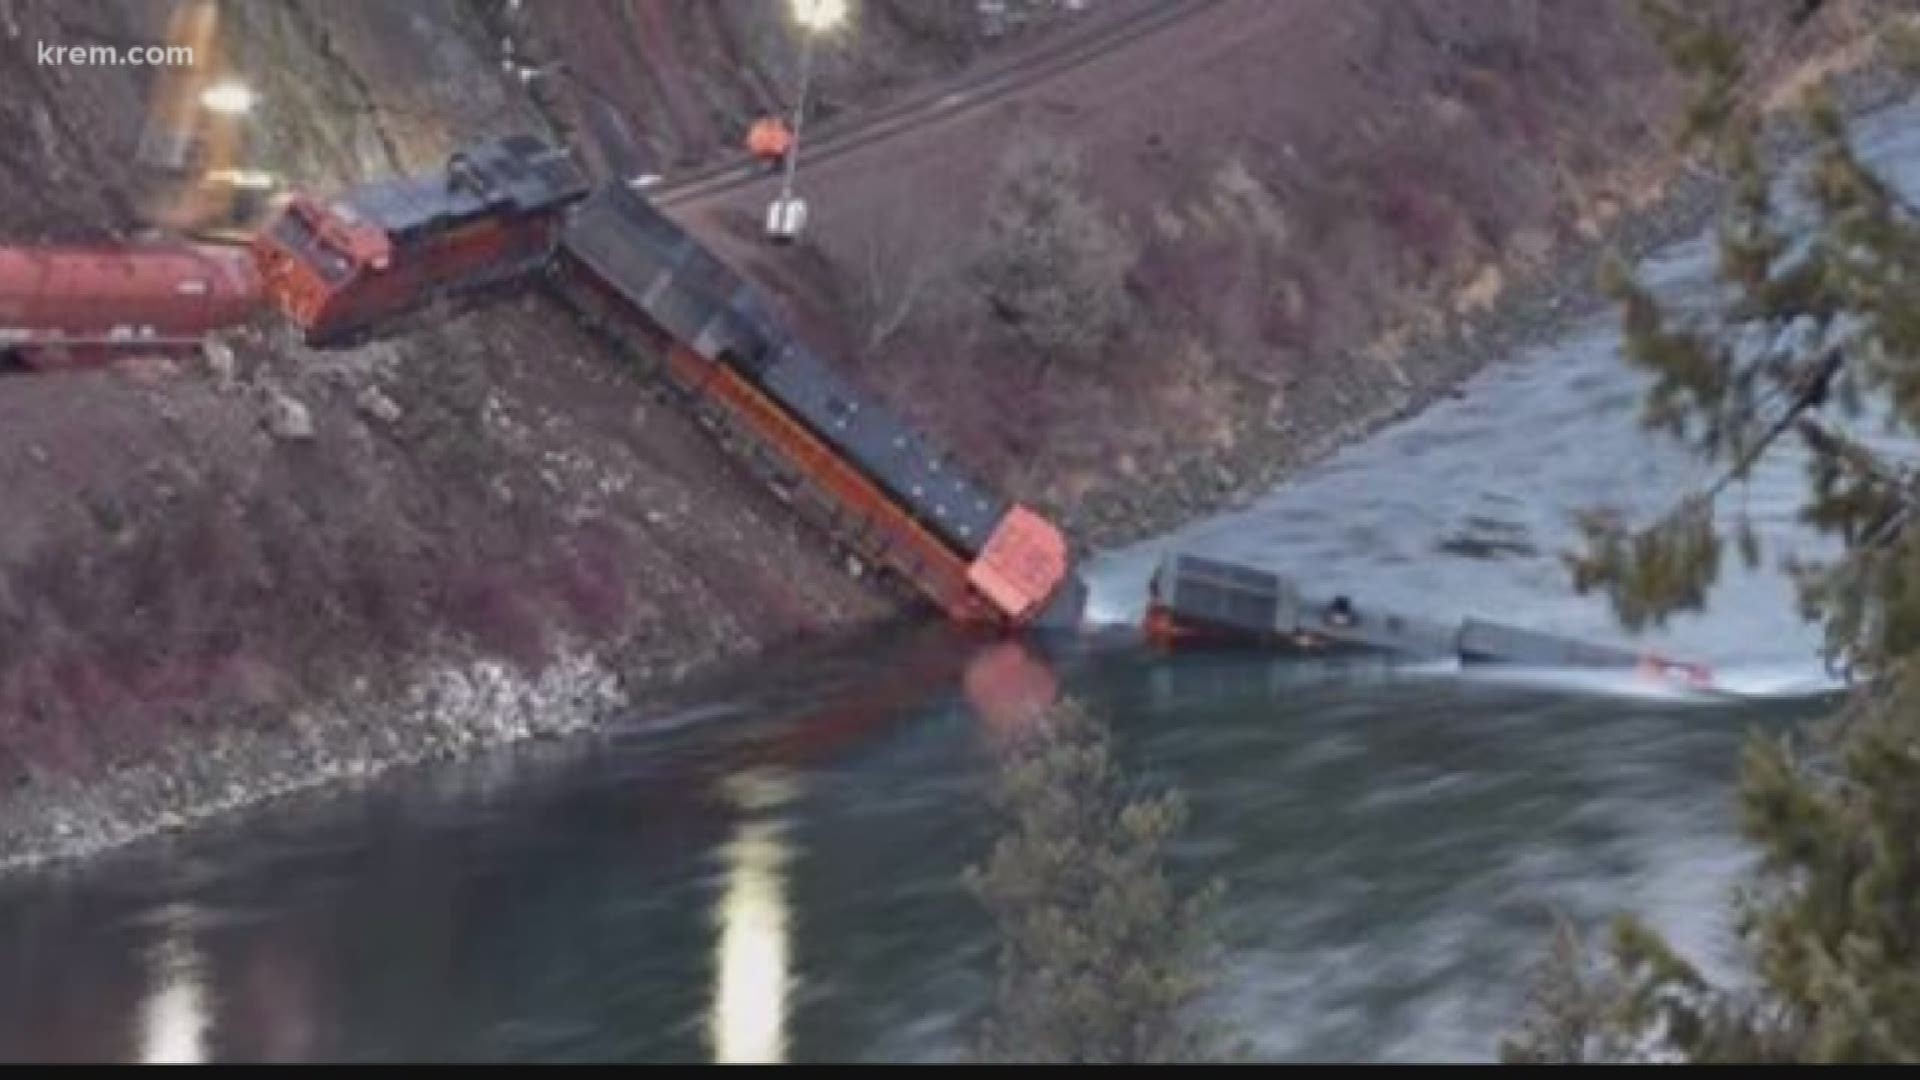 Two crew members have been rescued and are safe after a train derailed in the Kootenai River. The engine is confirmed to be in the river.